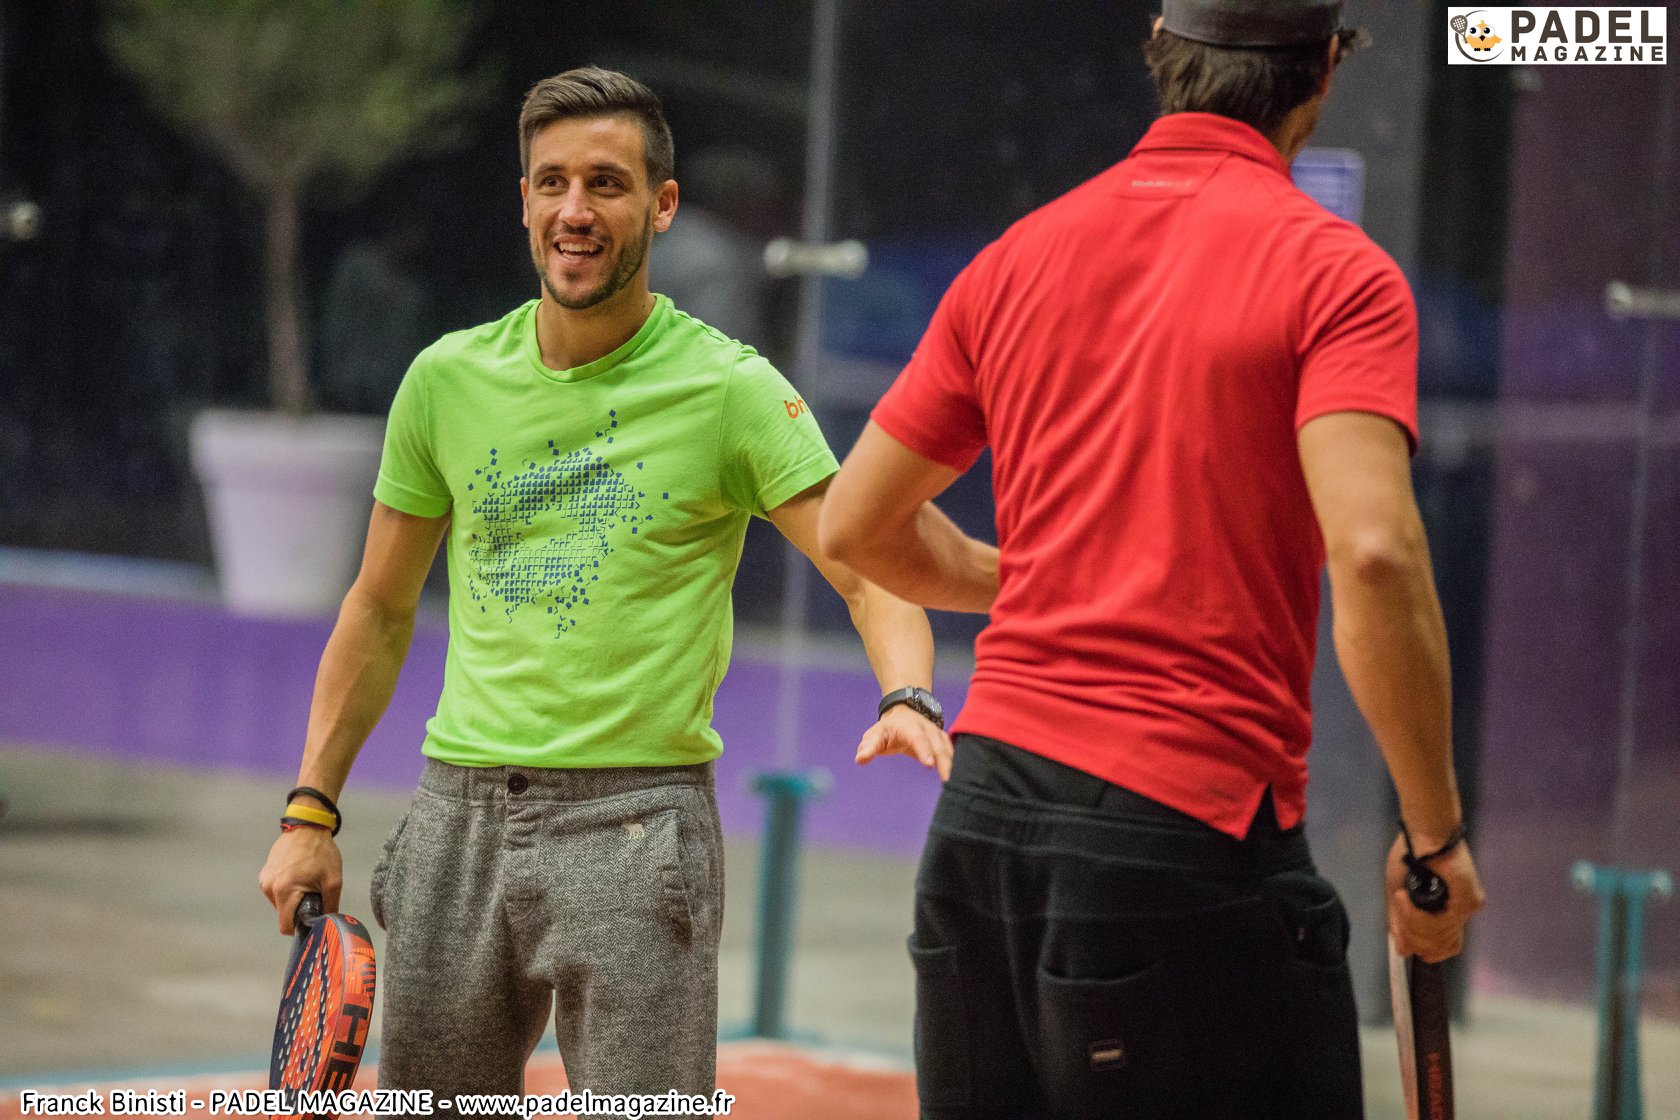 The 30th player in the world, Džumhur at padel